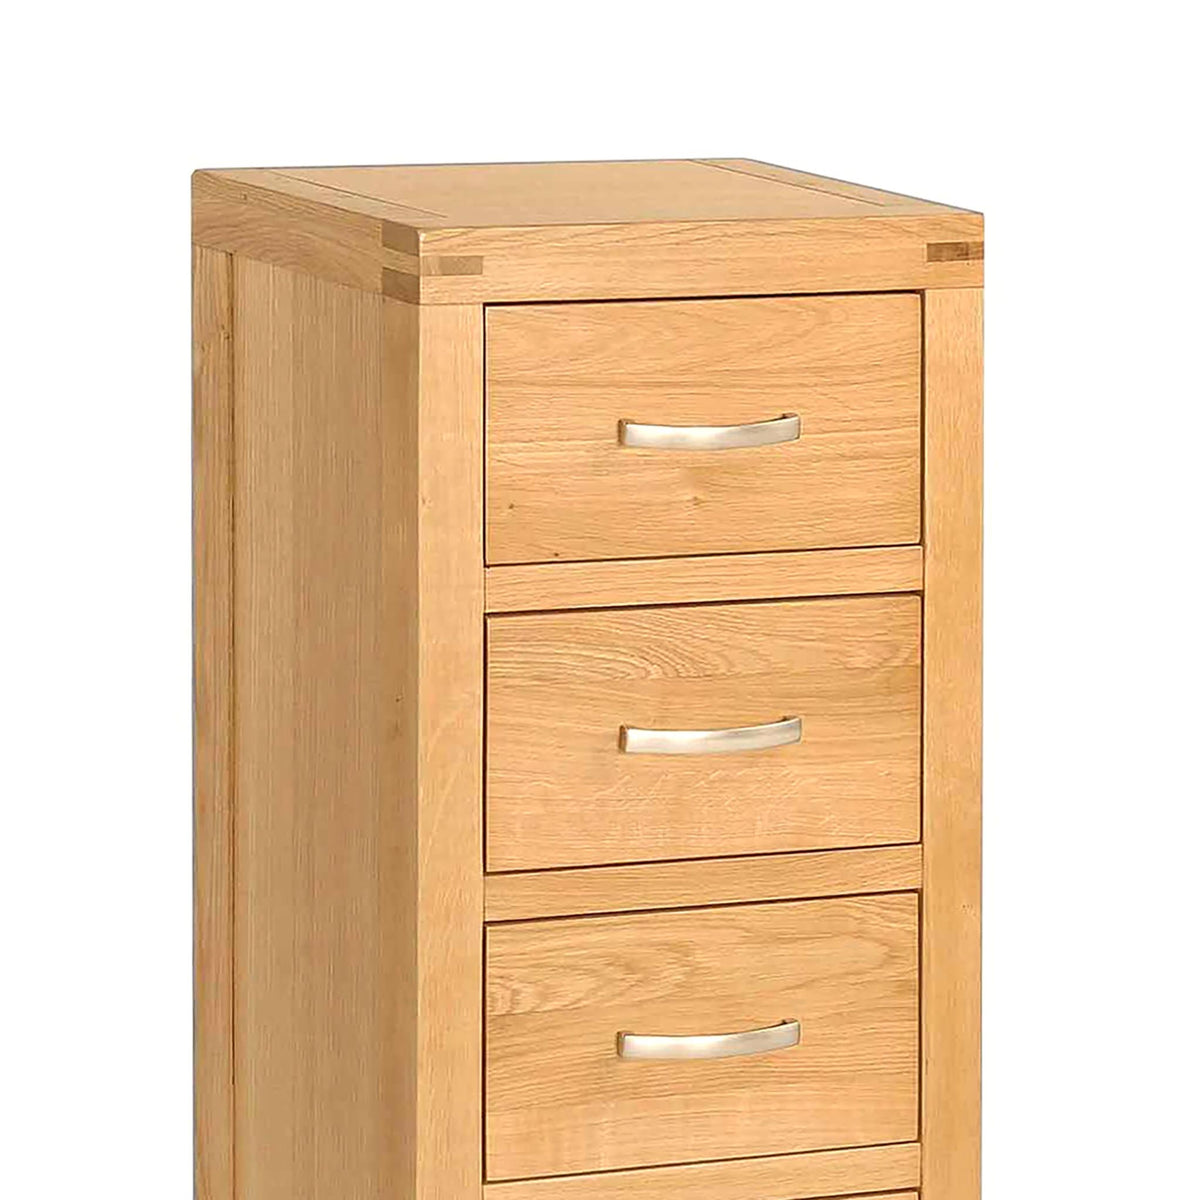 Abbey Light Oak Tallboy Chest of Drawers - Close up of top of drawers